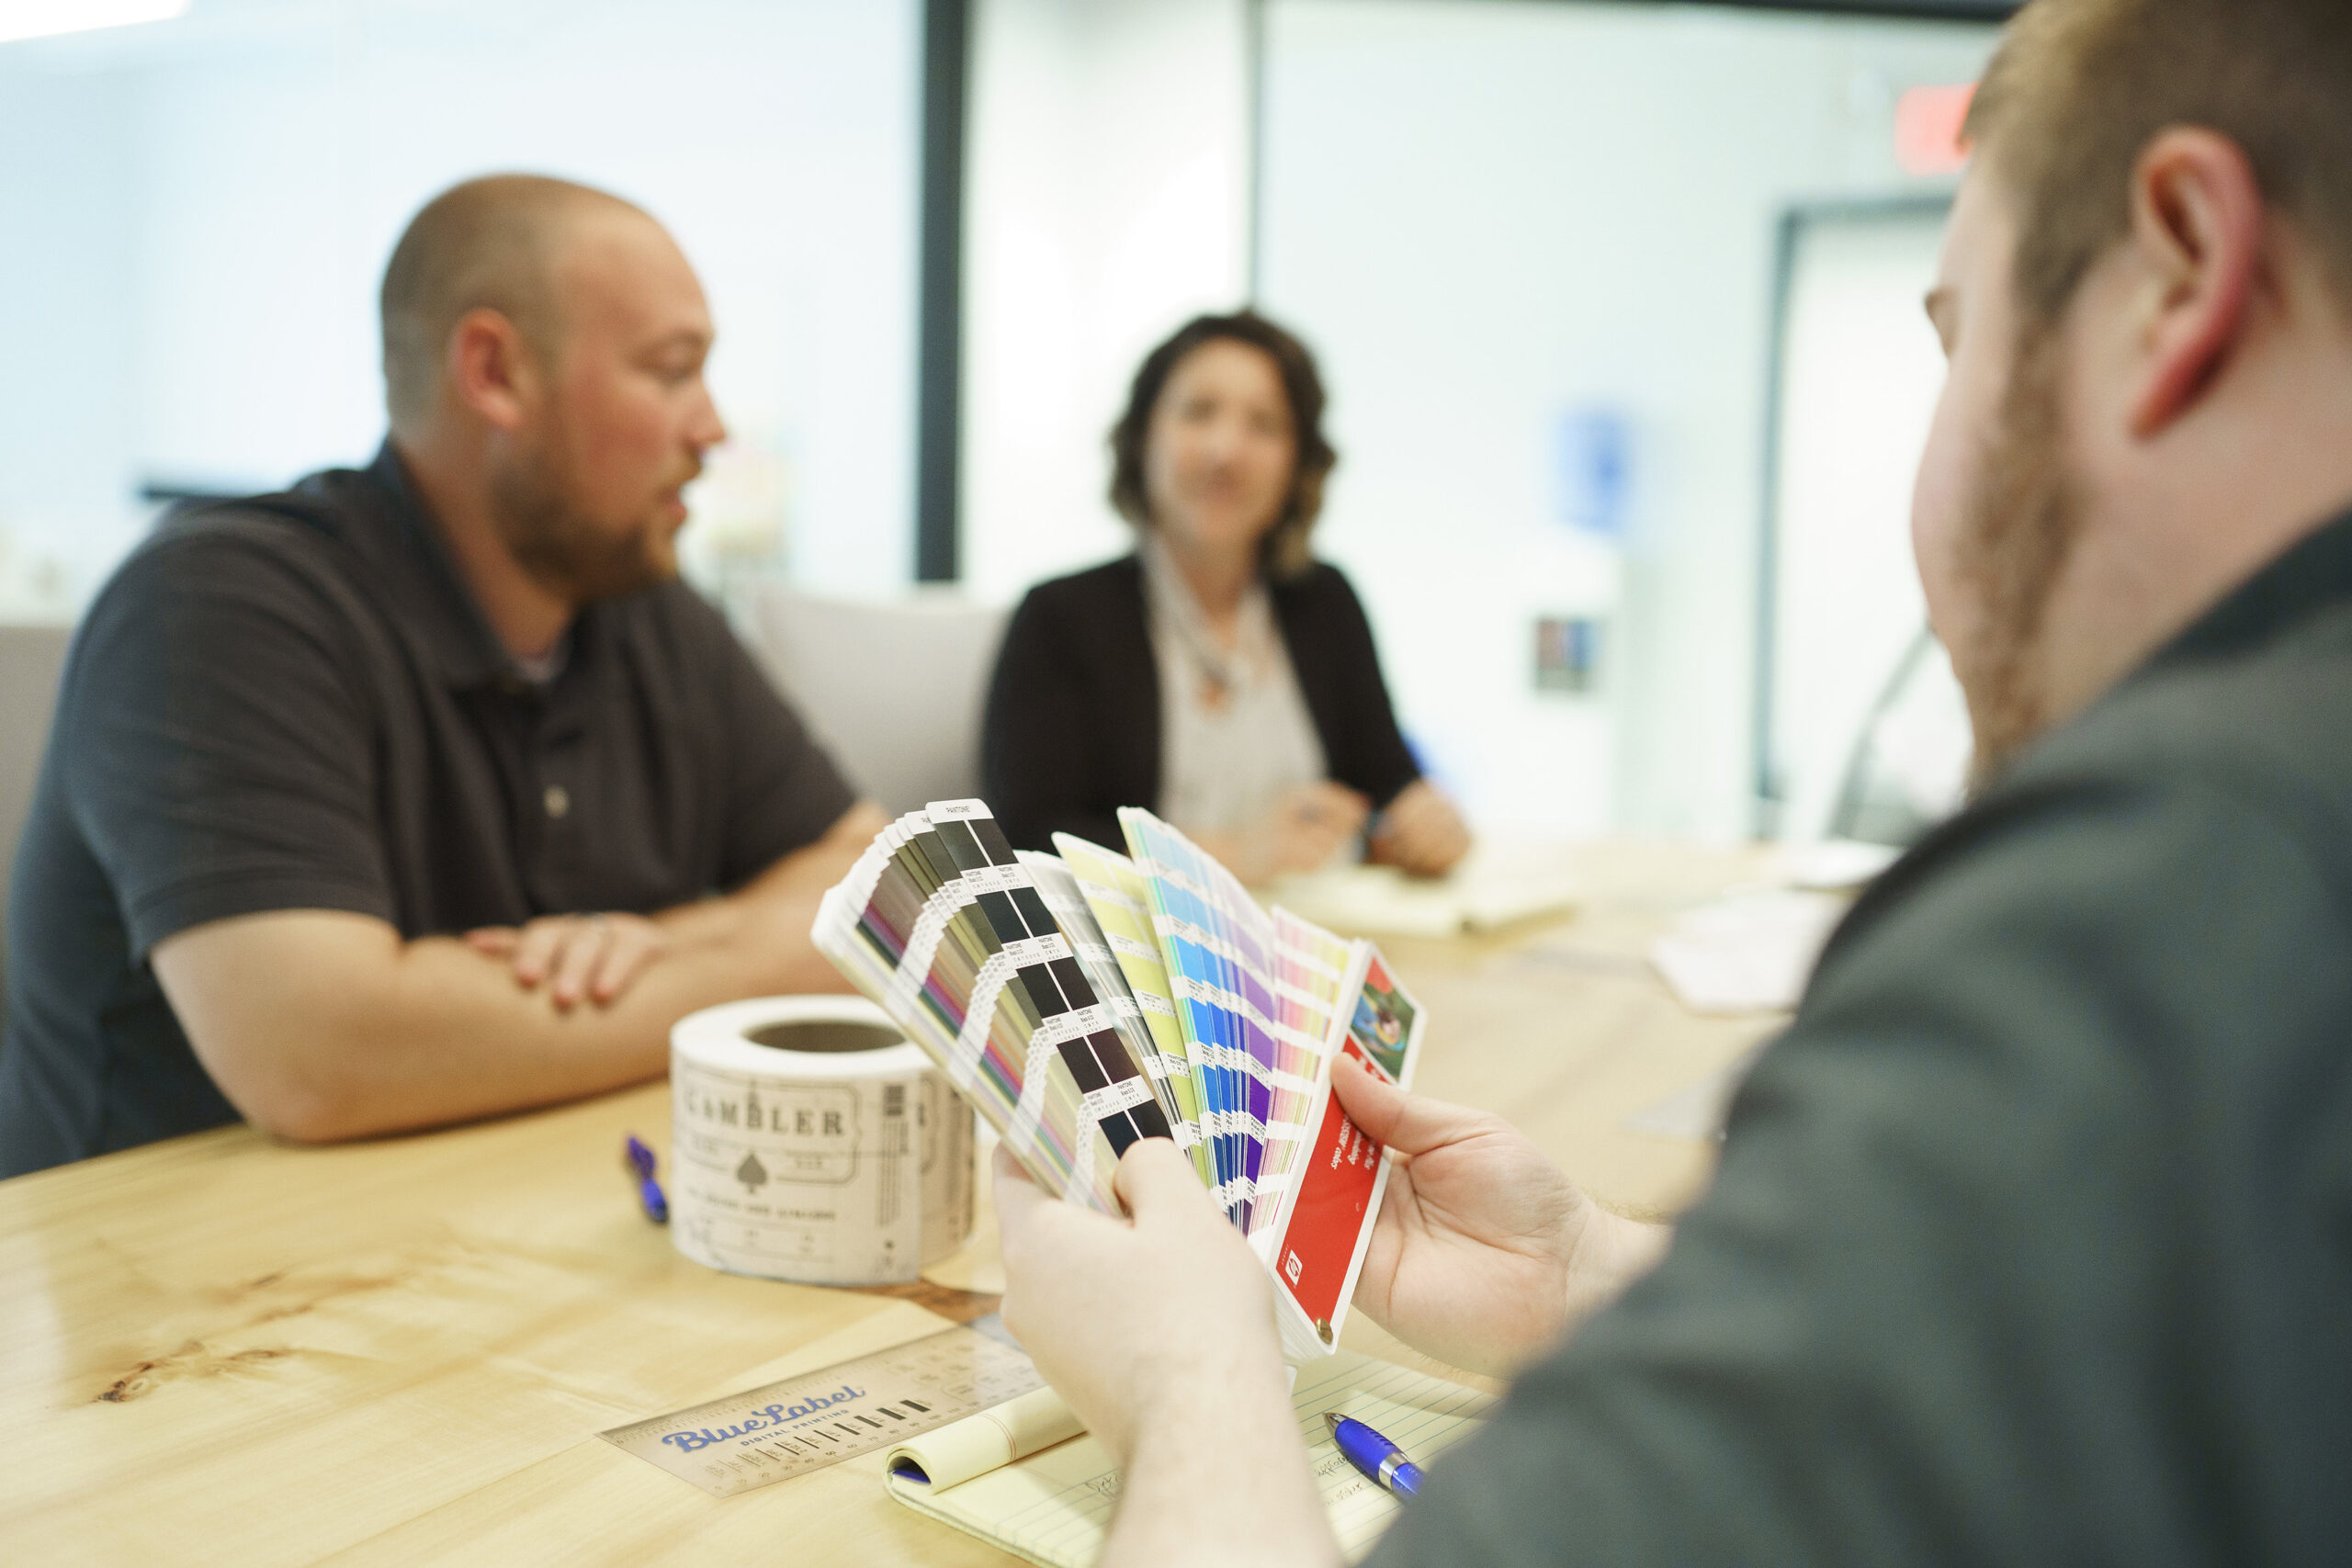 Label printing experts reviewing color options for a product.